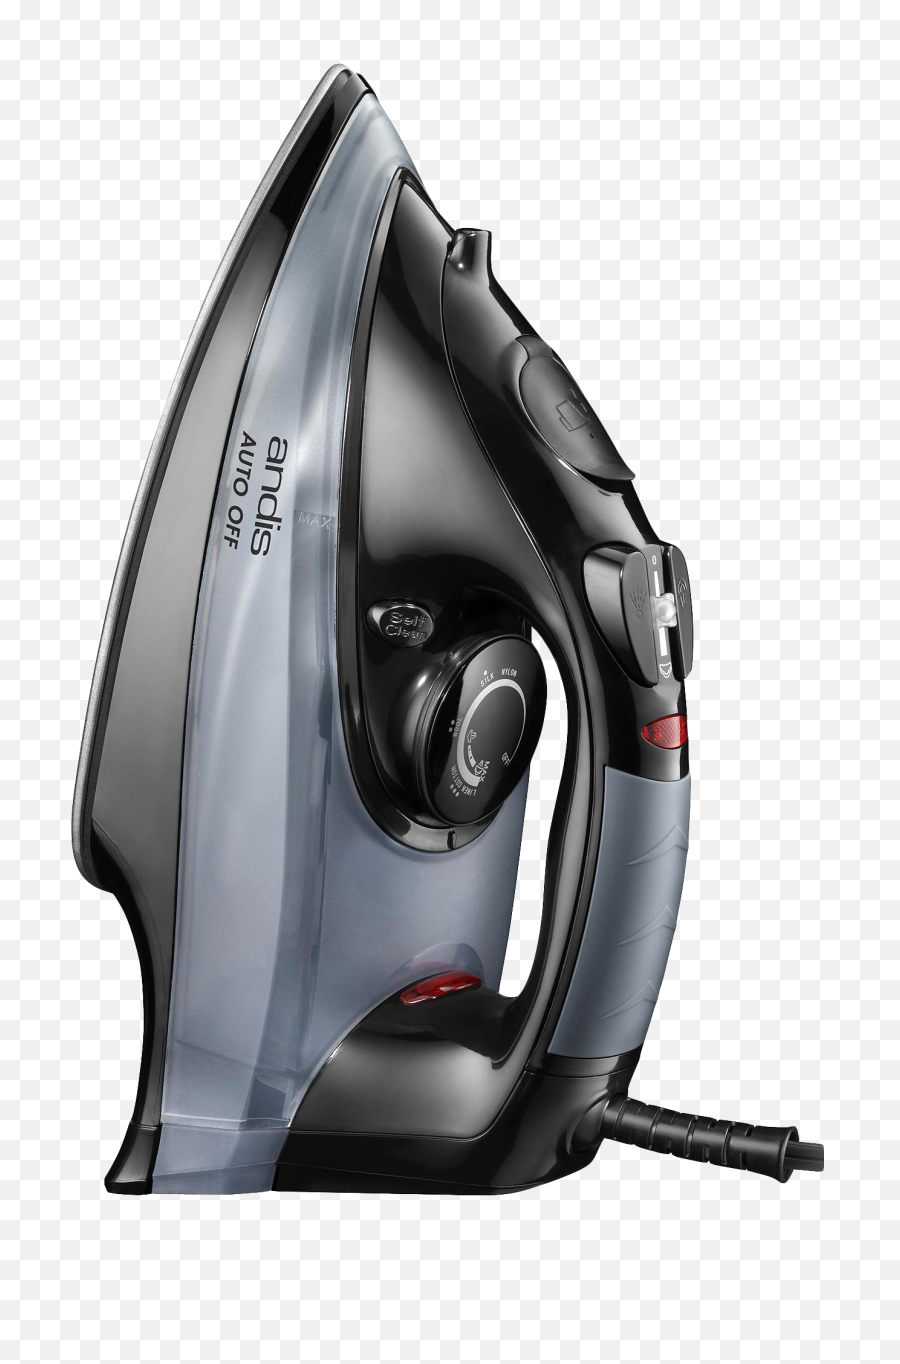 Iron Box Png Image - Clothes Iron,Iron Png